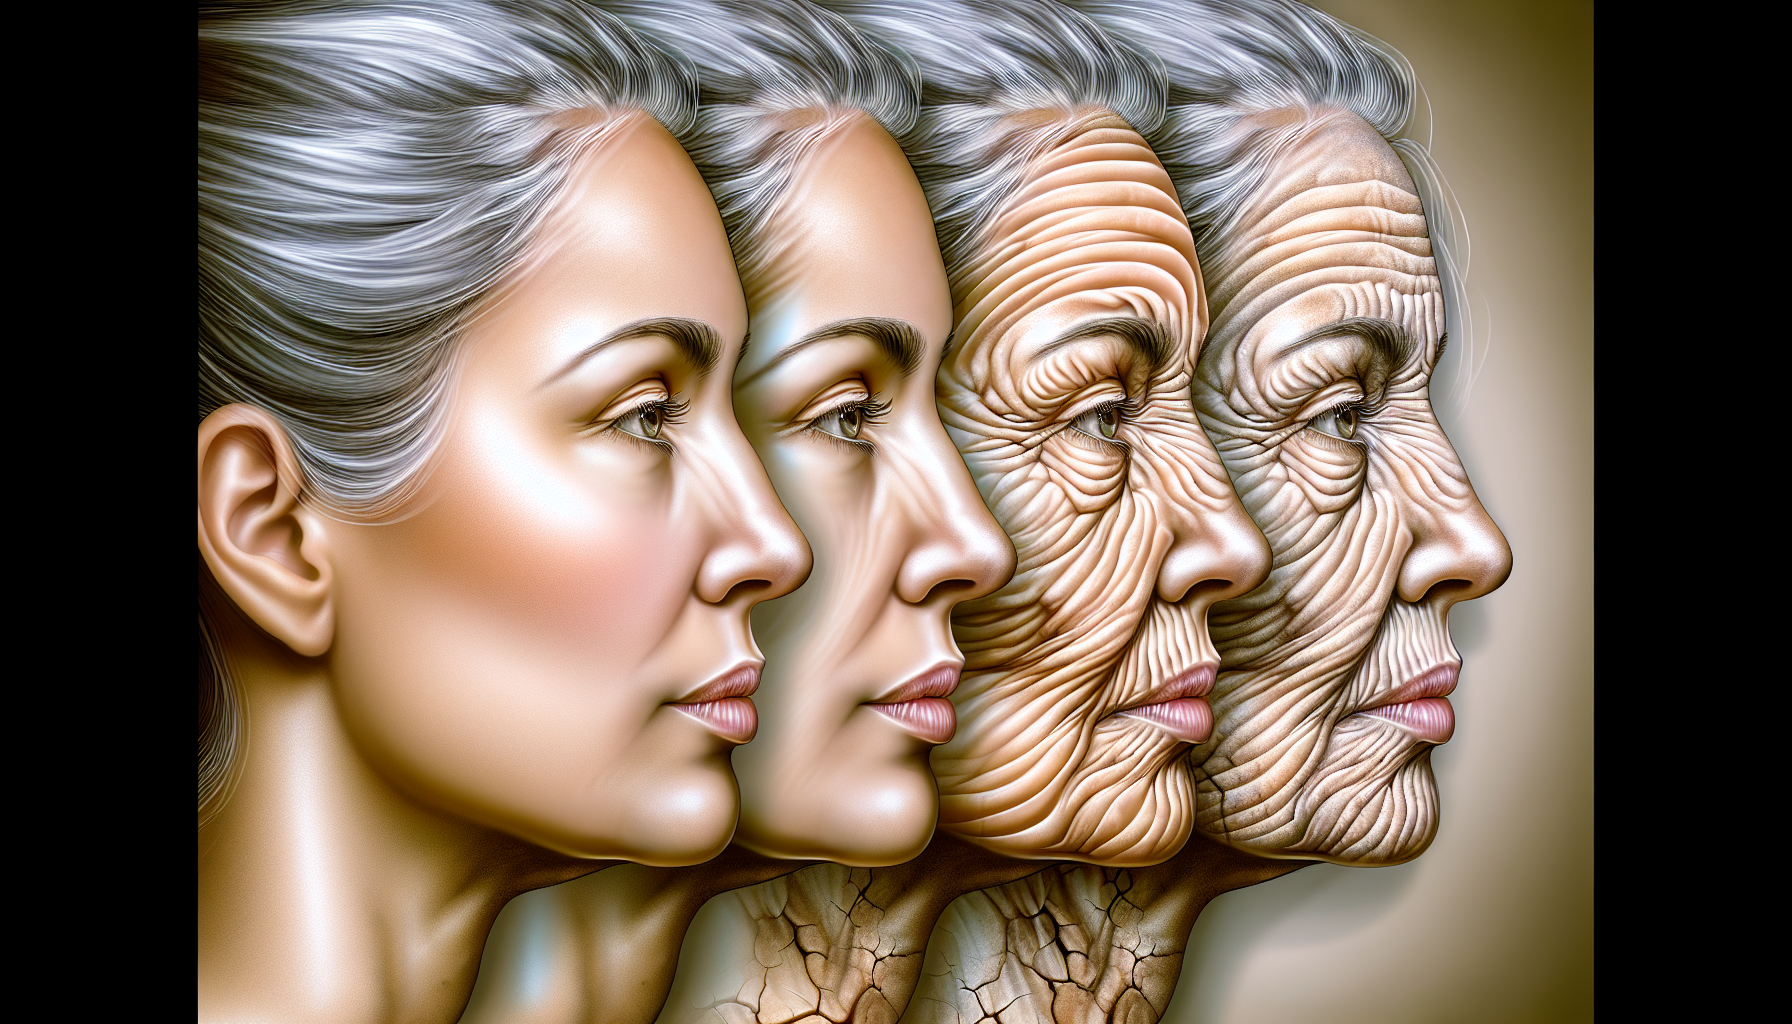 Illustration of aging skin due to declining estrogen levels and reduced collagen production